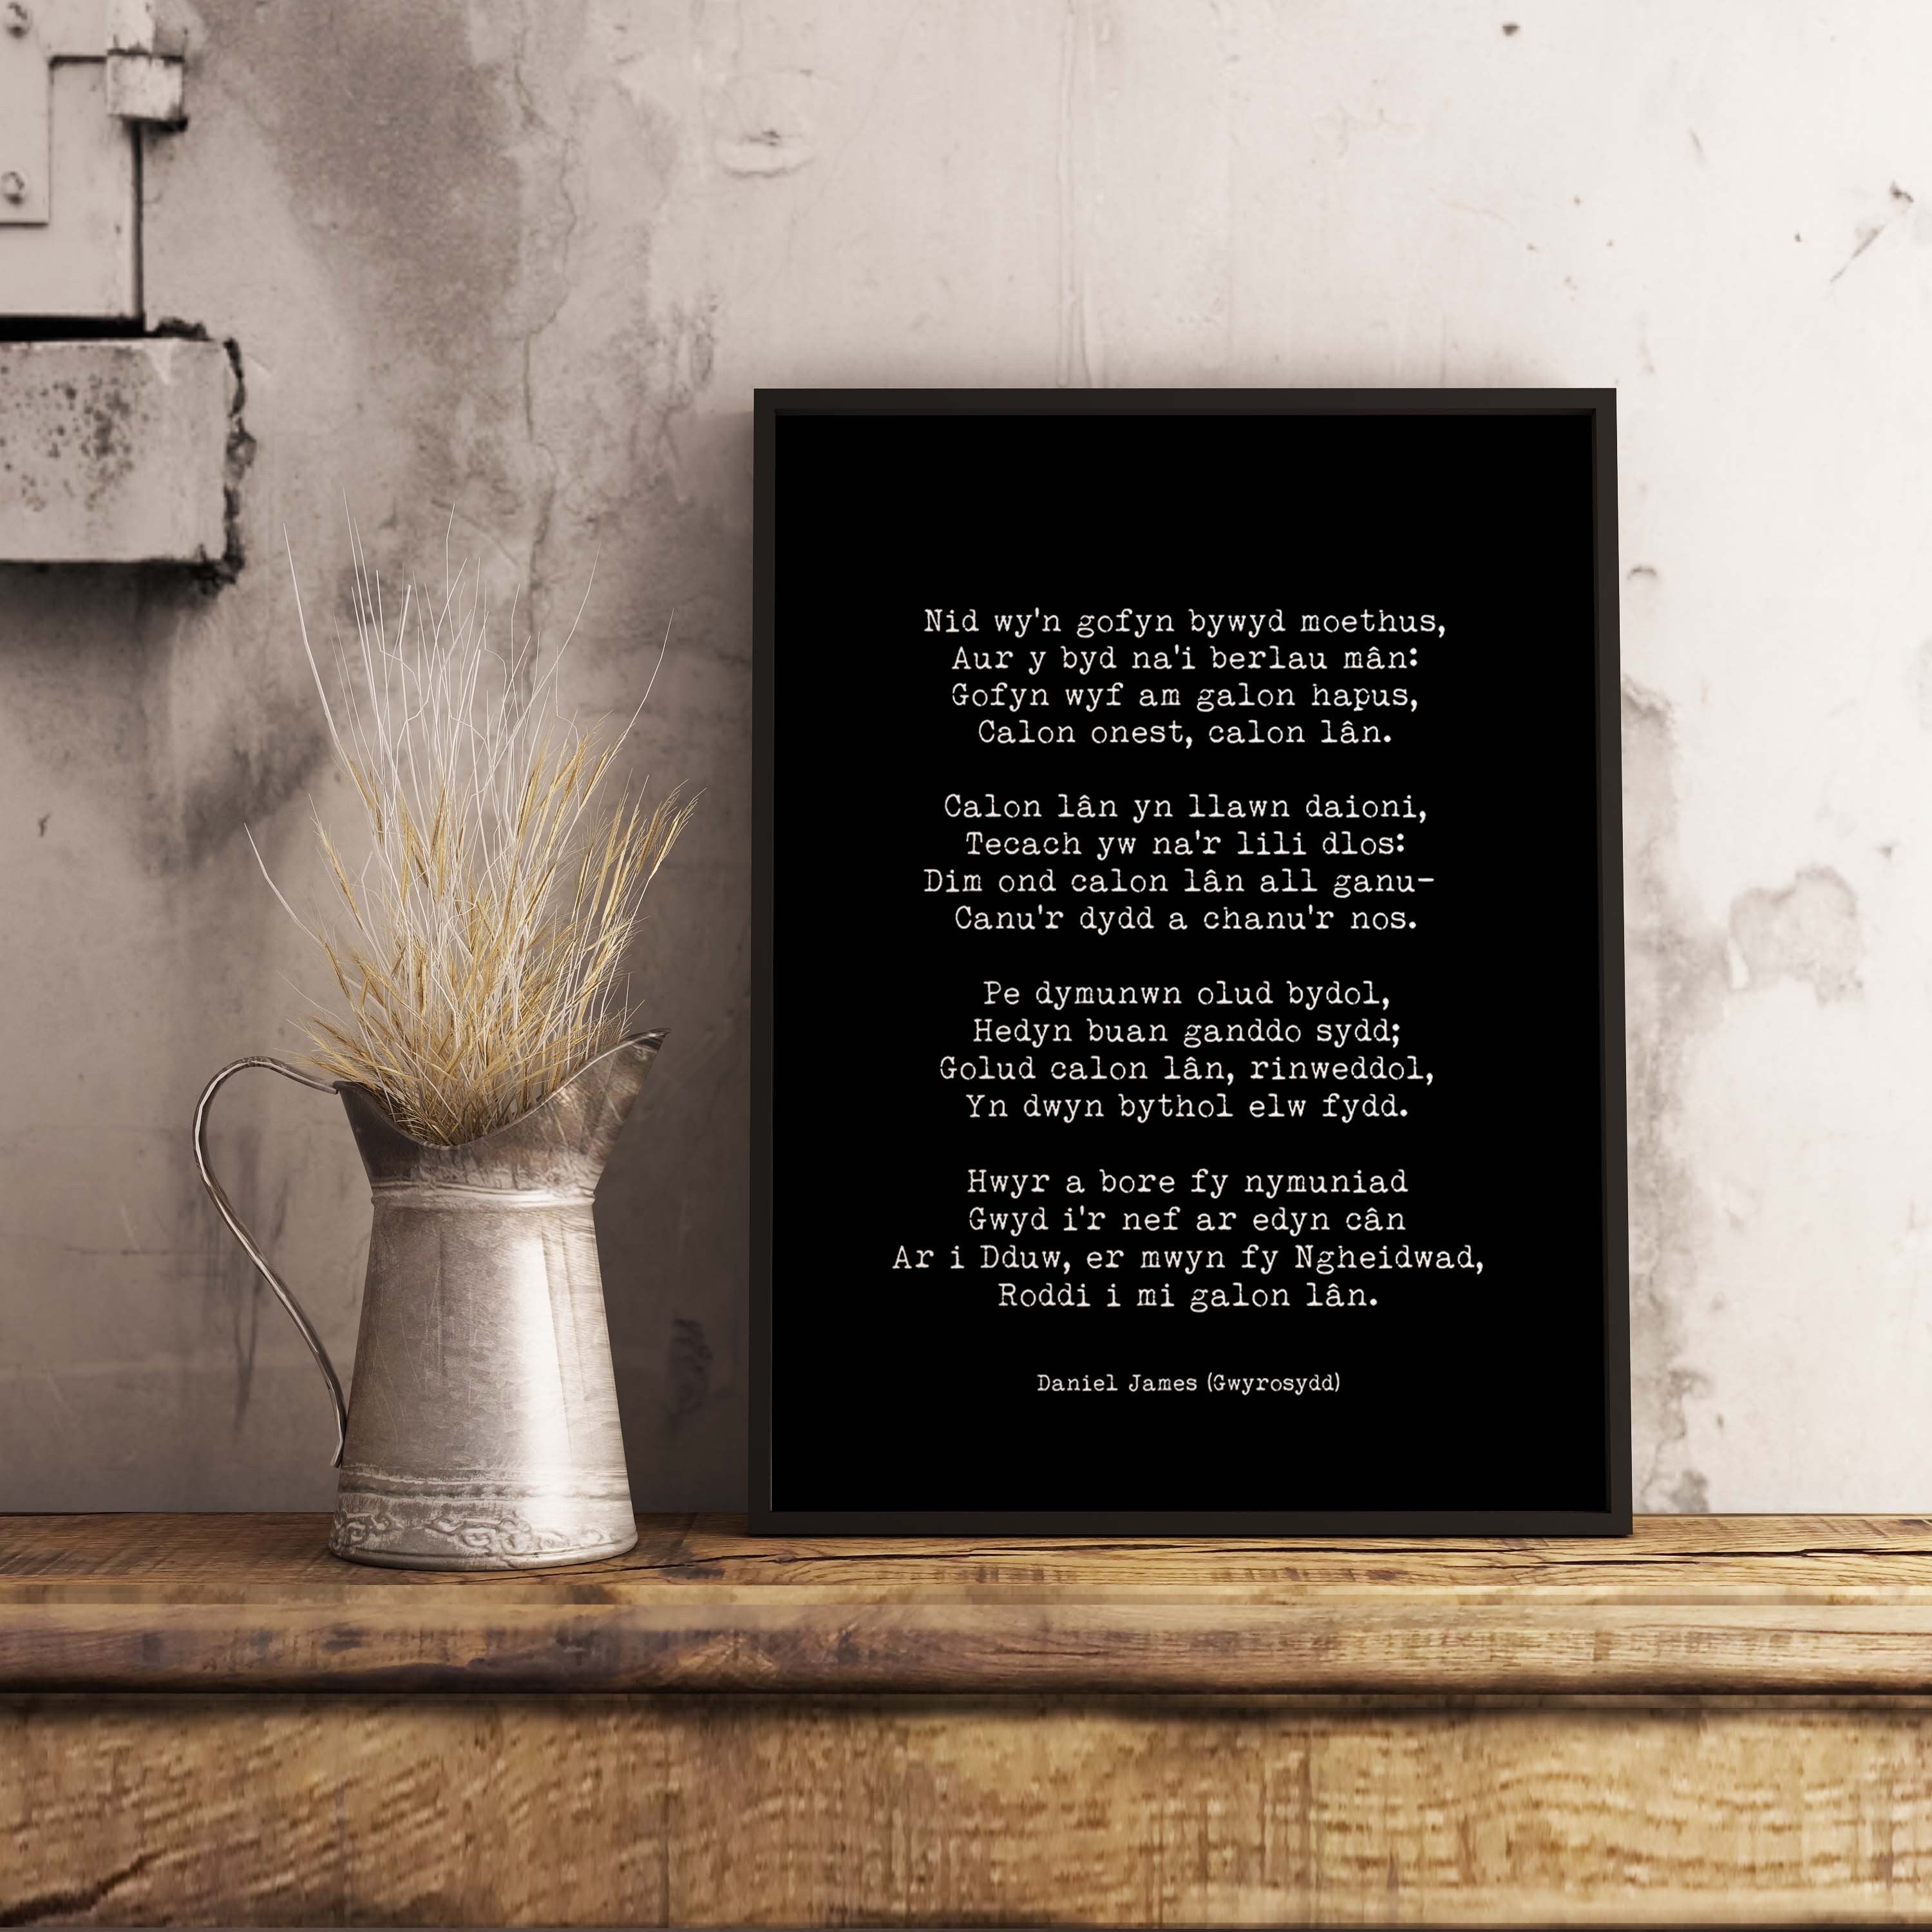 Calon Lan Welsh Poem Print, Daniel James Gwyrosydd Poetry Poster in Black & White for Home Wall Decor